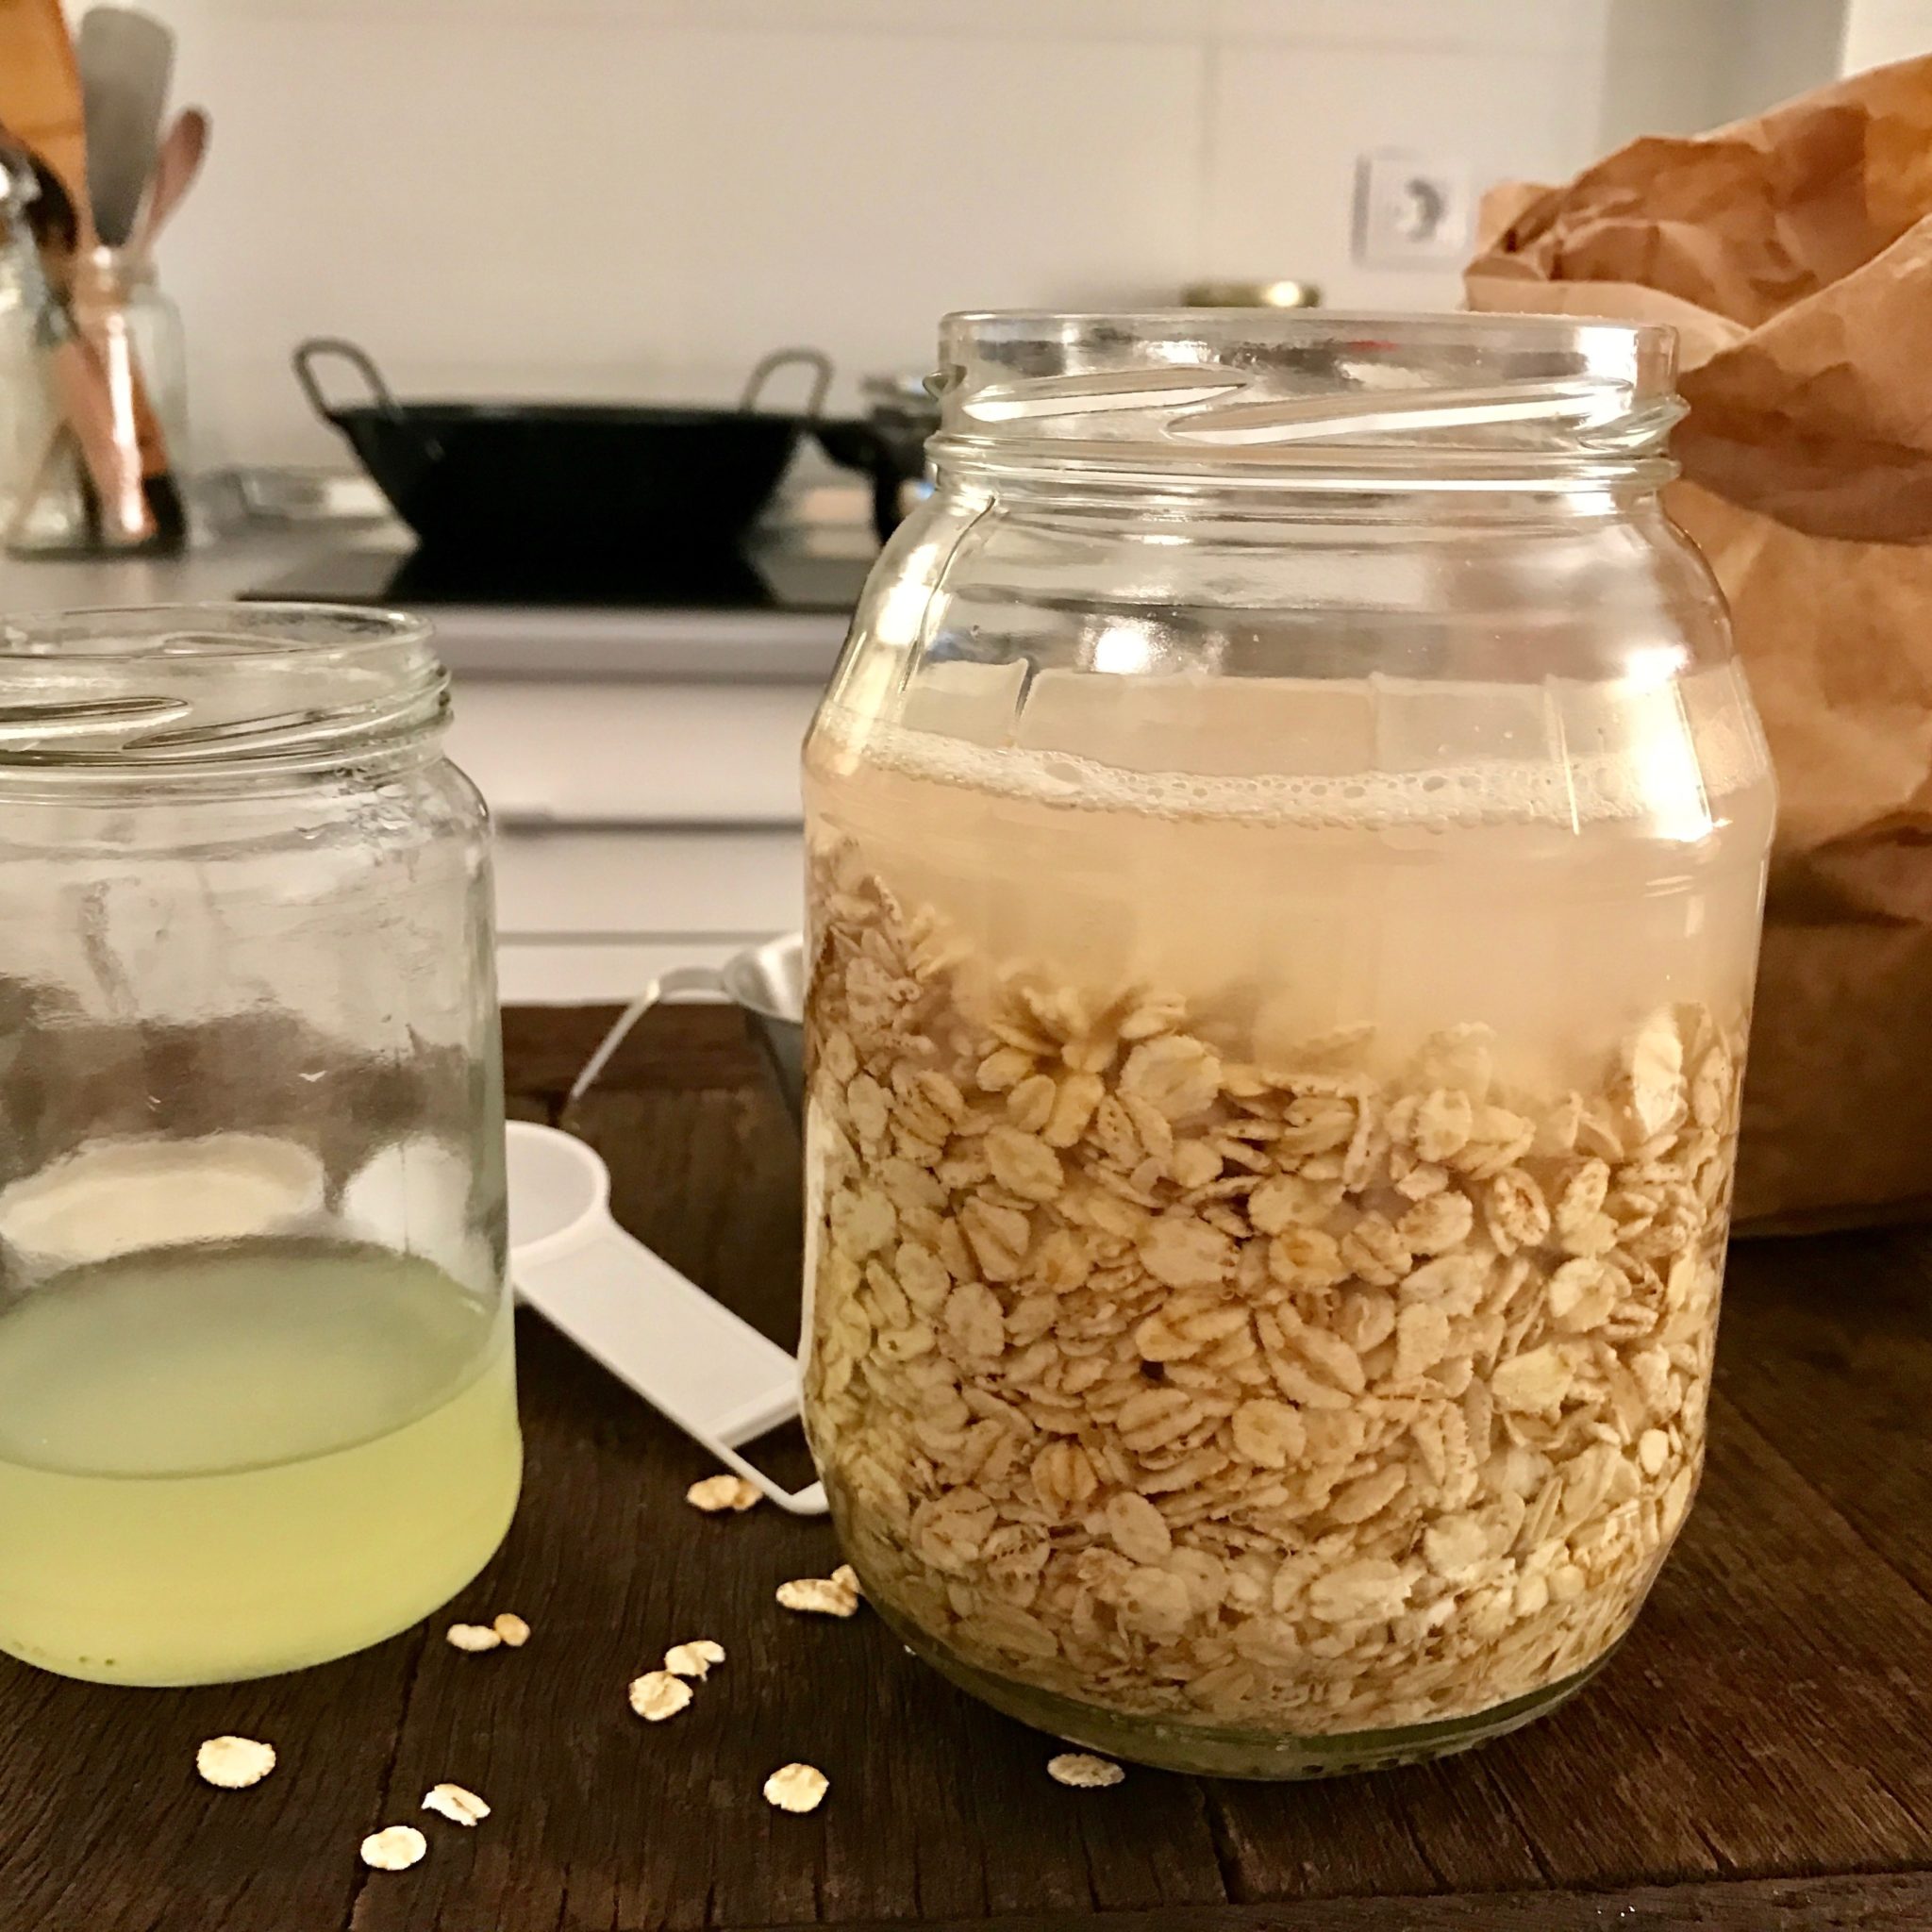 Mix rolled oats and barley flakes in a glass jar, cover them with lukewarm water, add 1 tbsp of liquid whey